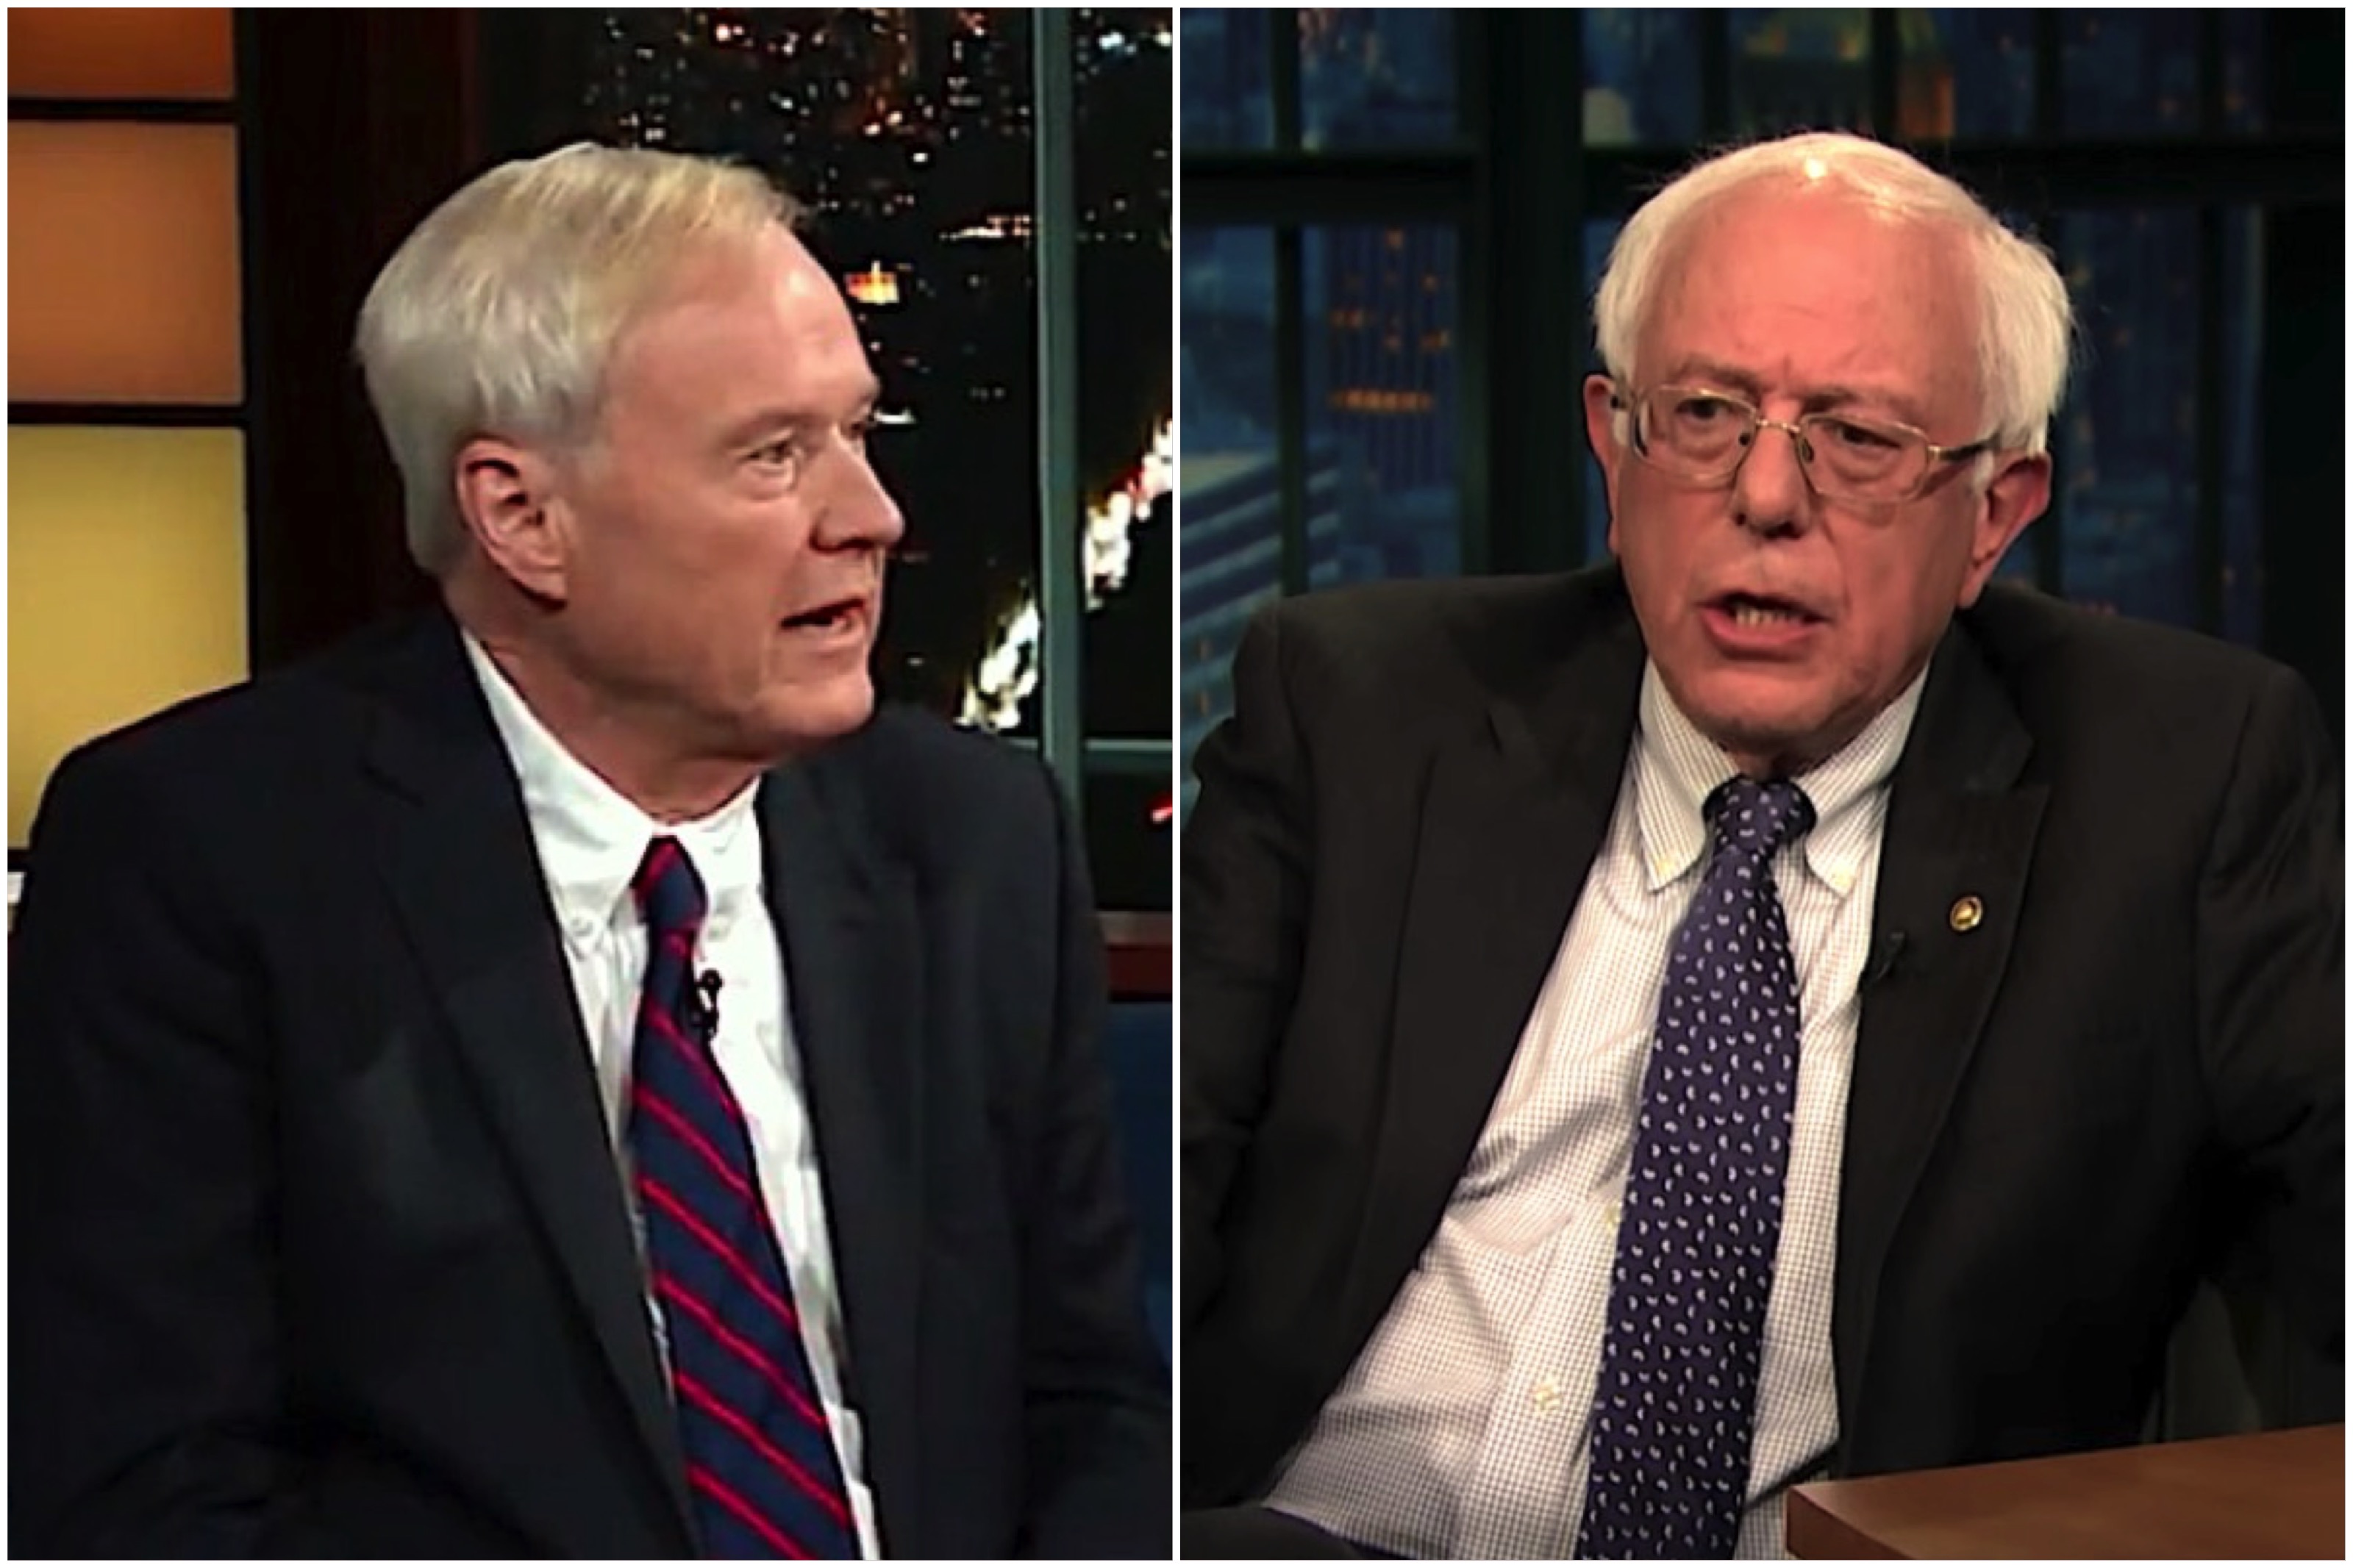 Chris Matthews and Bernie Sanders tackled the Mueller indictments